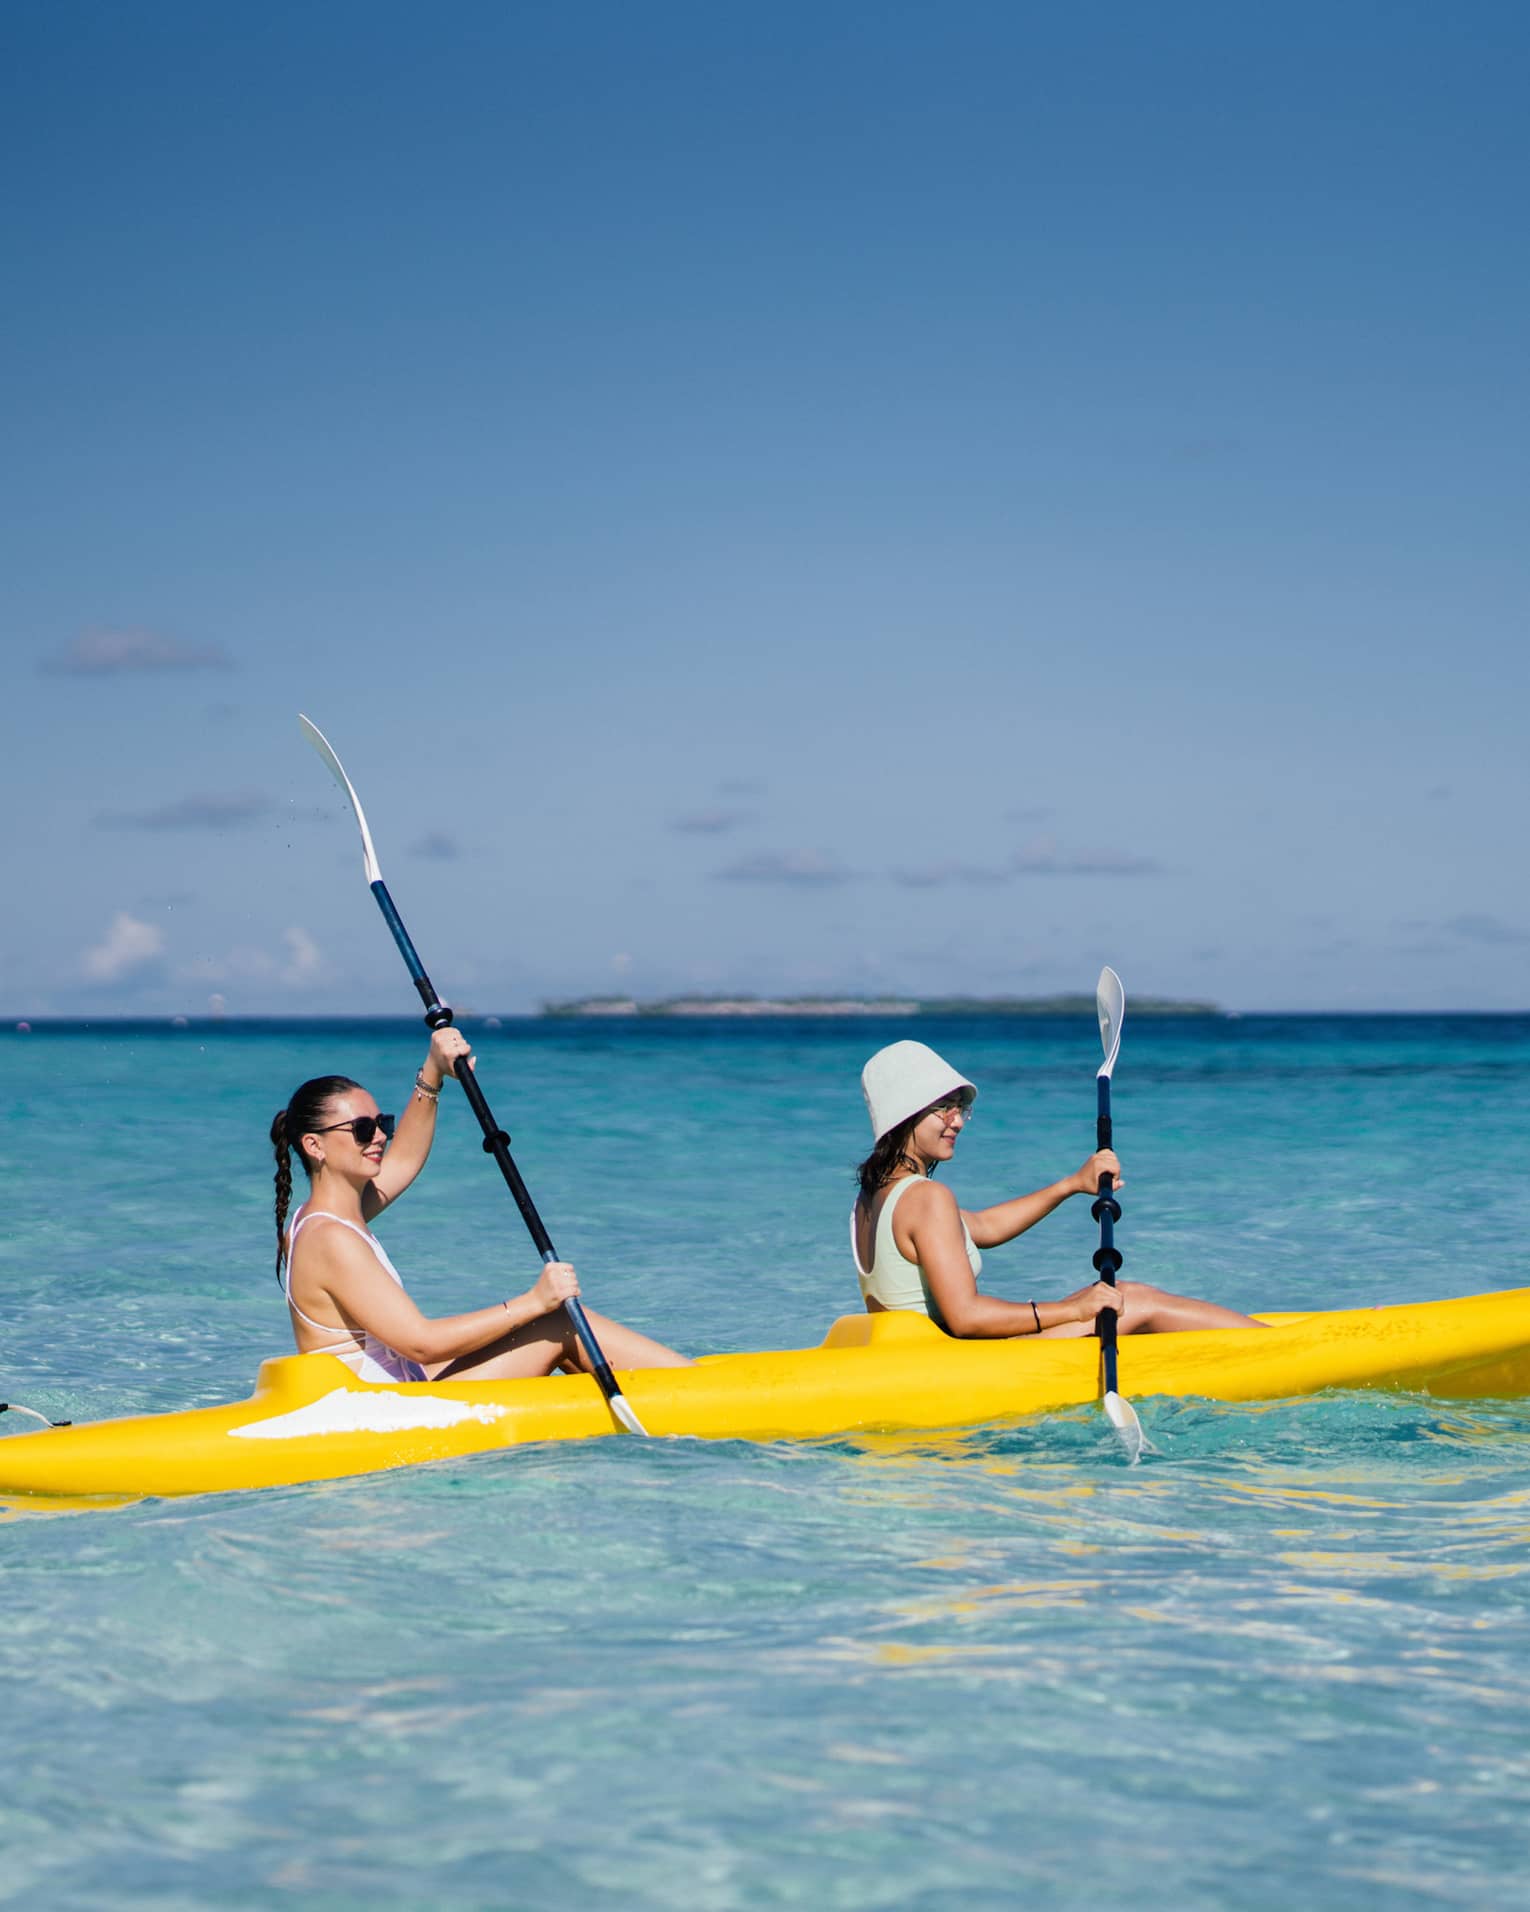 Two people smile as they paddle a yellow kayak in a turquoise lagoon under a clear blue sky; low island in the distance.